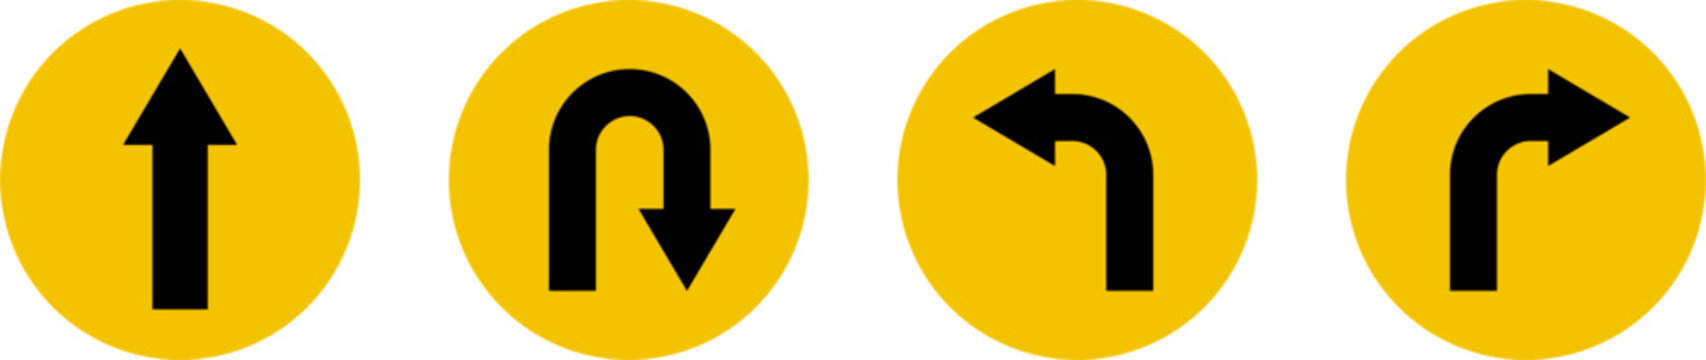 Go Straight This Way One Way Only U Turn Left and Right Black and Yelllow Arrow Round Circle Traffic Sign Direction Icon Set. Vector Image.	